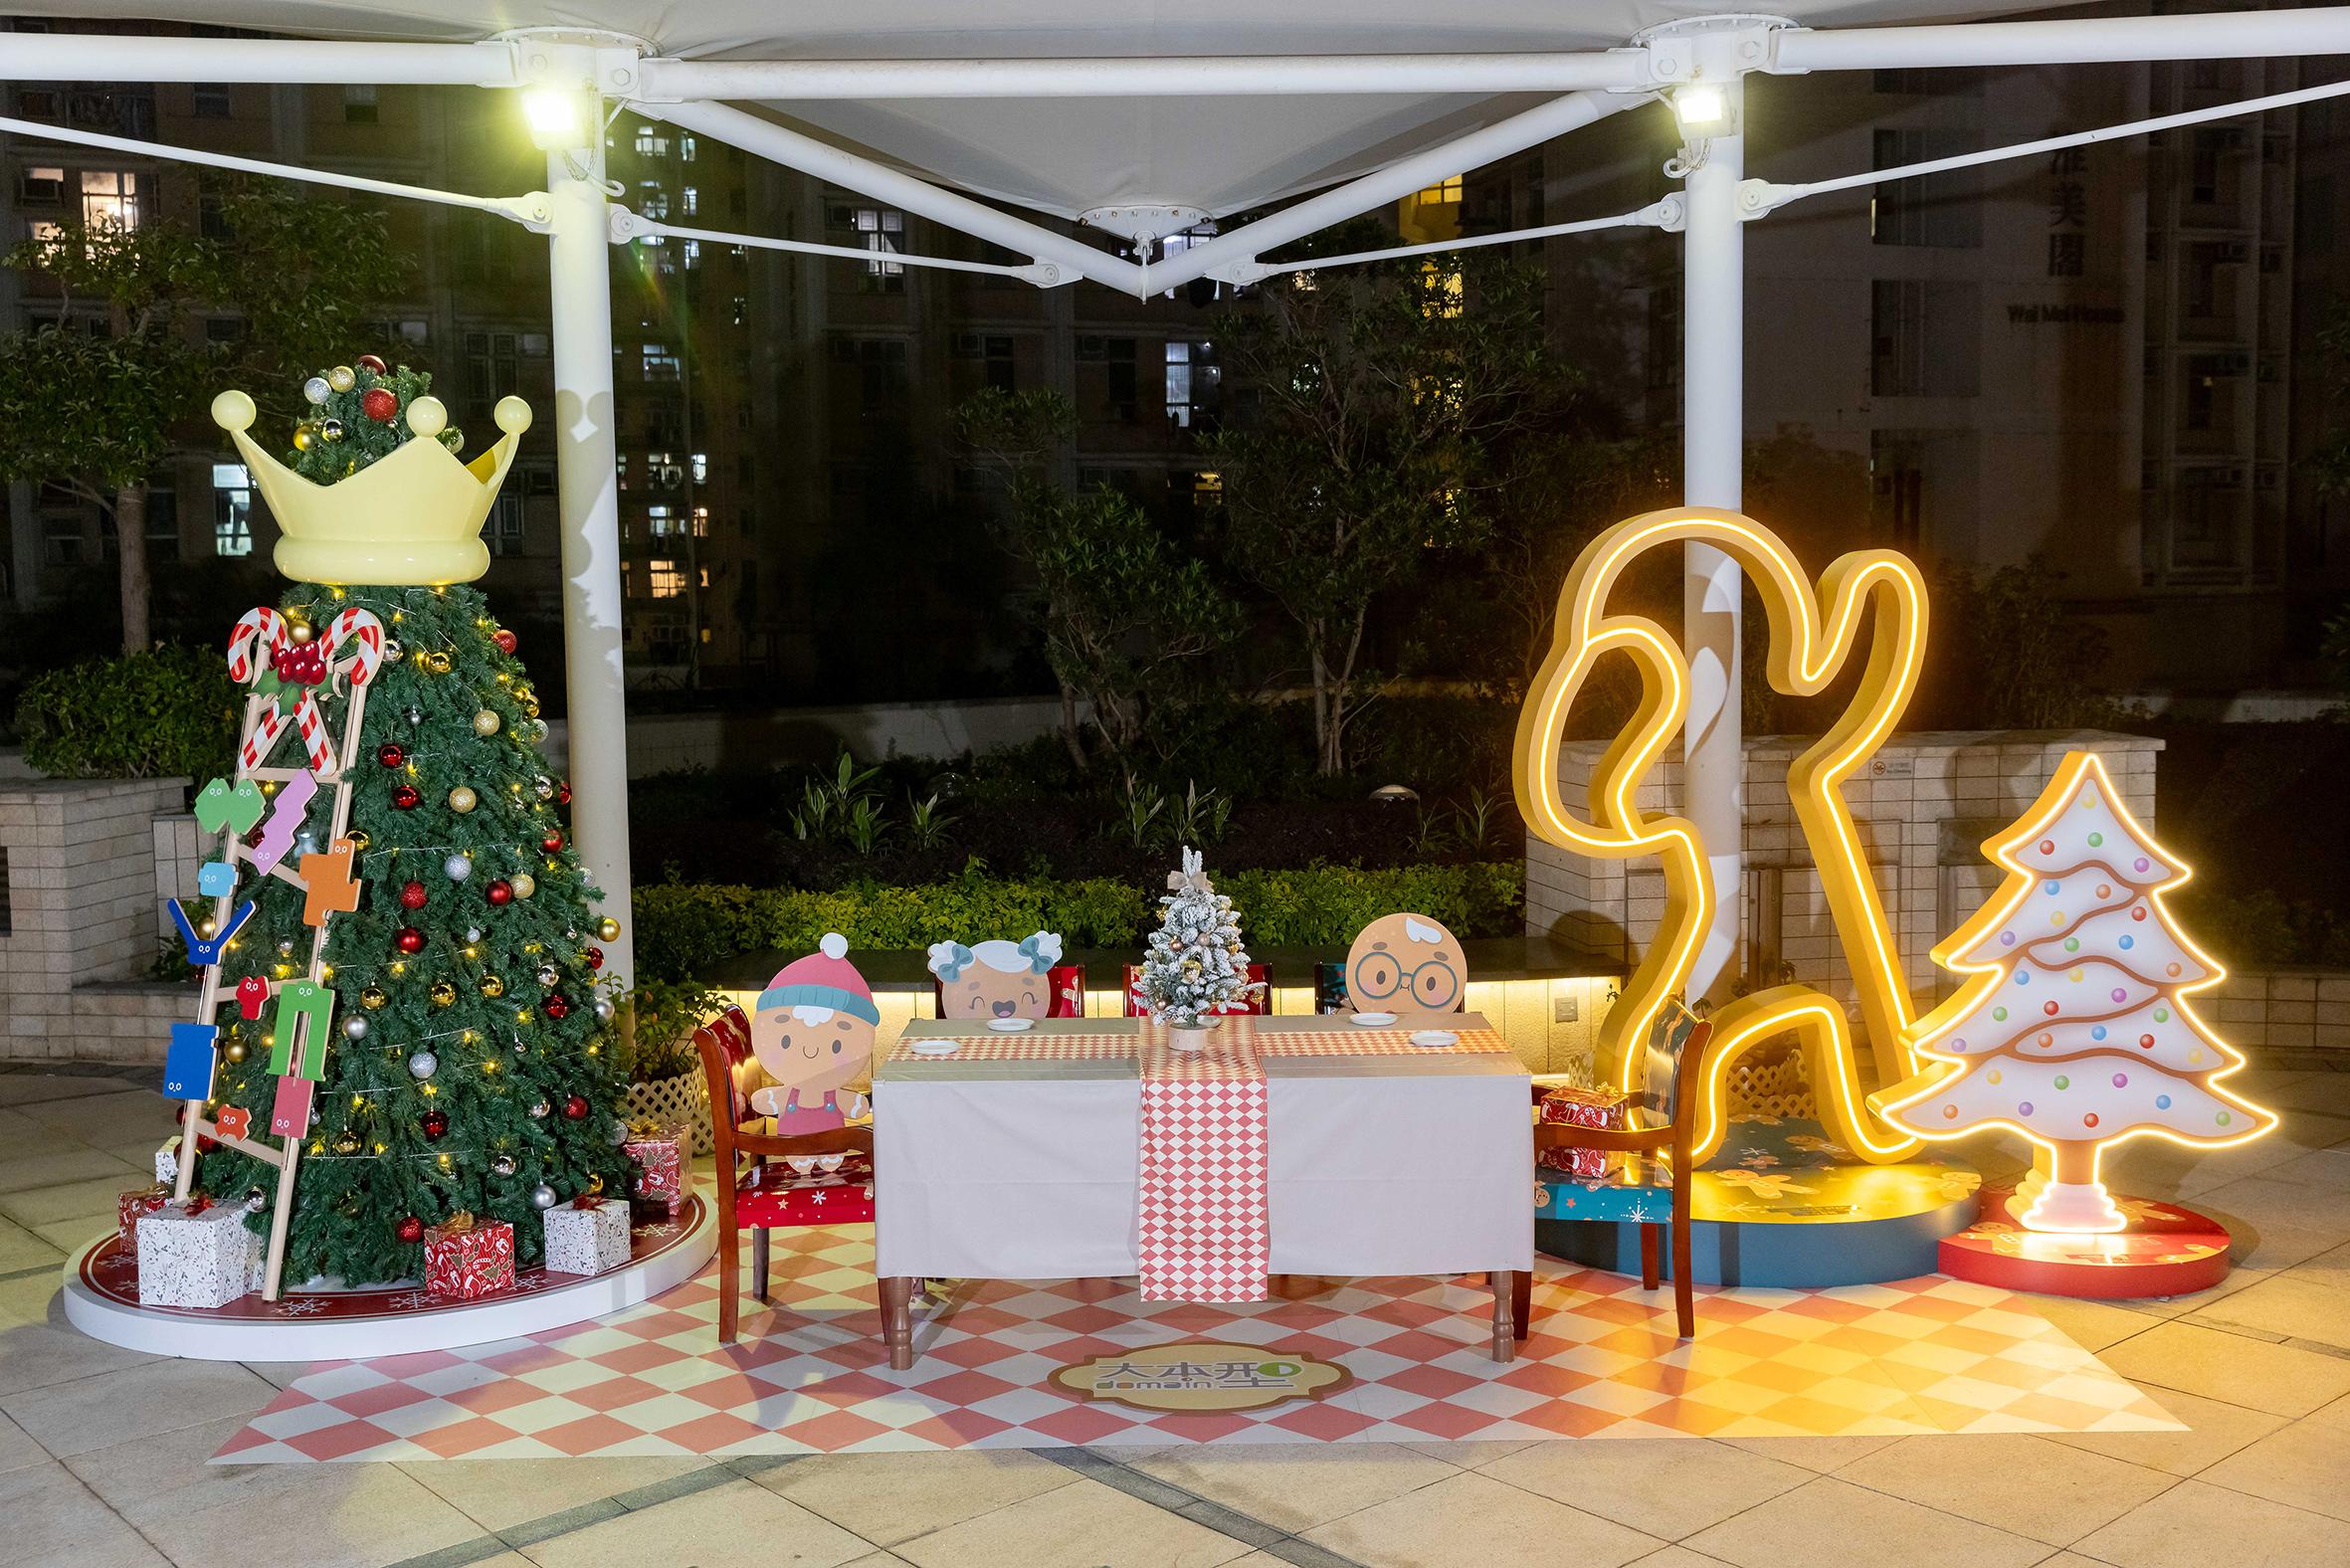 The Hong Kong Housing Authority (HA) is launching Christmas promotions and night vibe activities at its shopping centres to share the holiday season's joy with the public. Photo shows  Christmas decorations of gingerbread man molds at the roof garden of the HA's regional shopping centre, Domain, in Yau Tong.